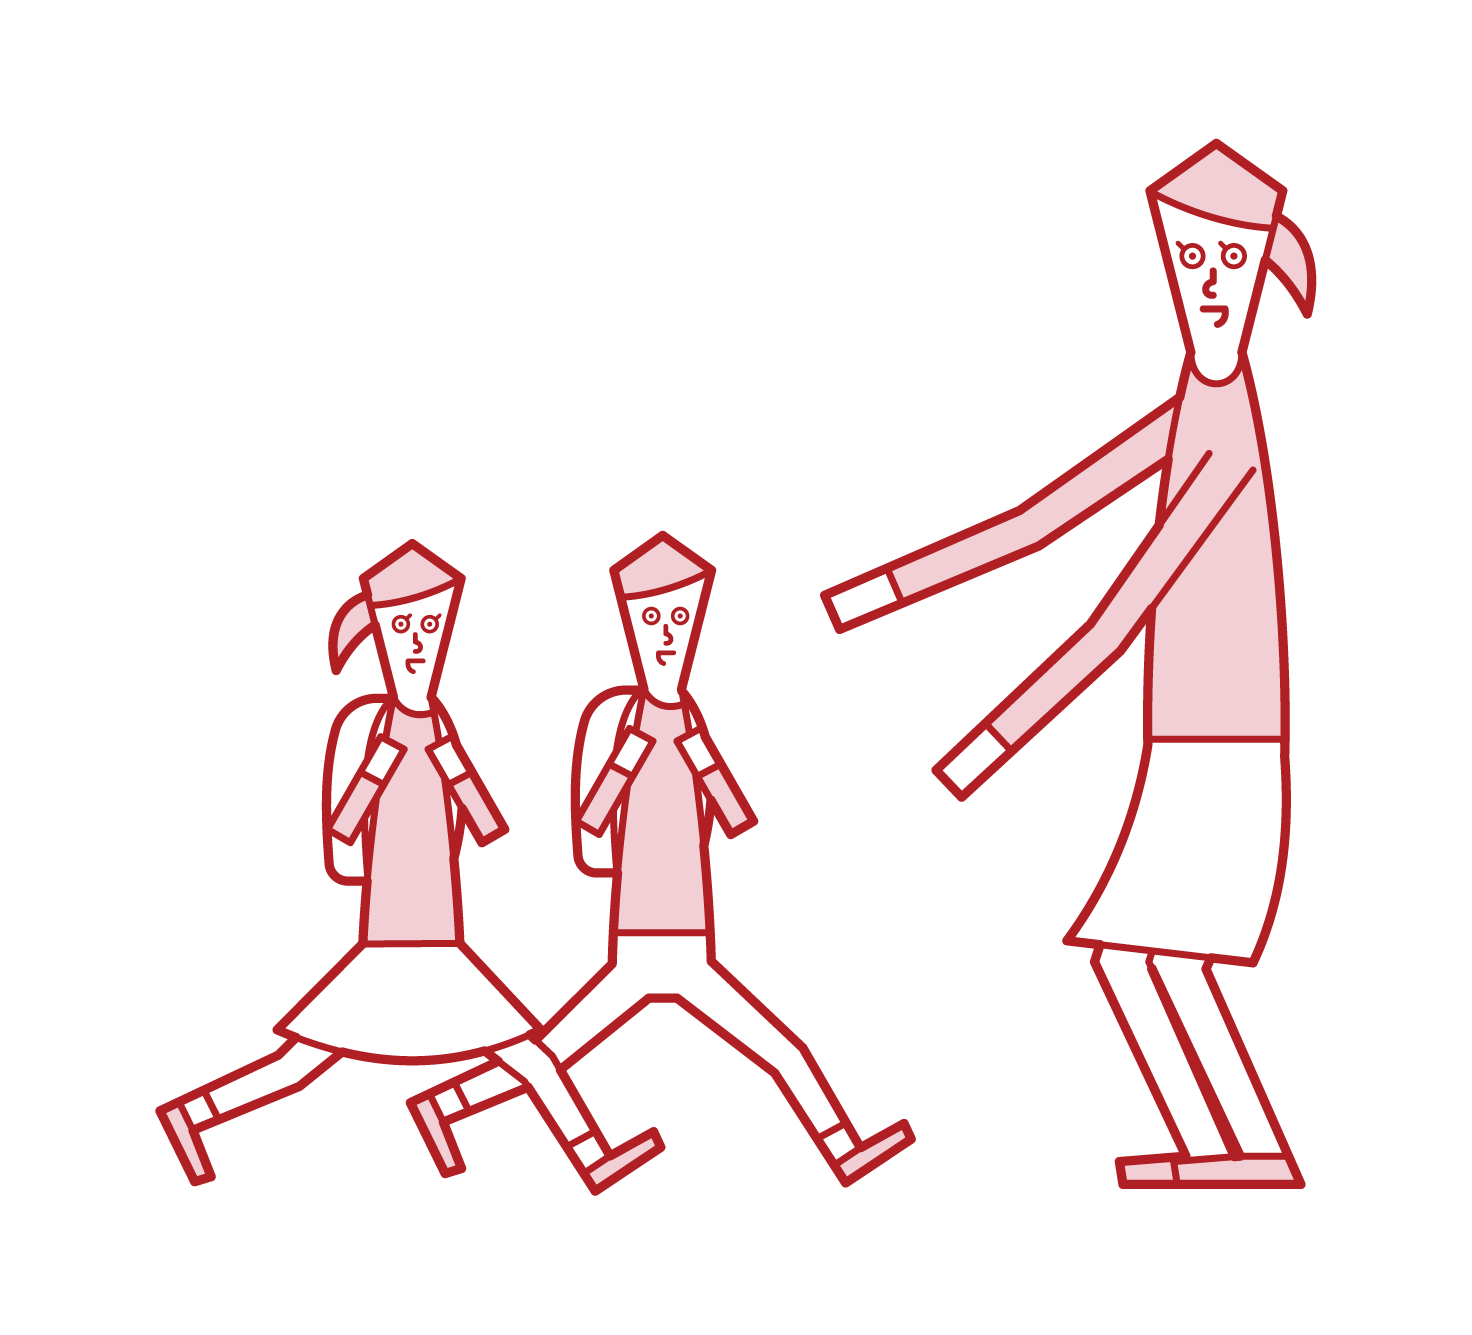 Illustration of a mother greeting her children